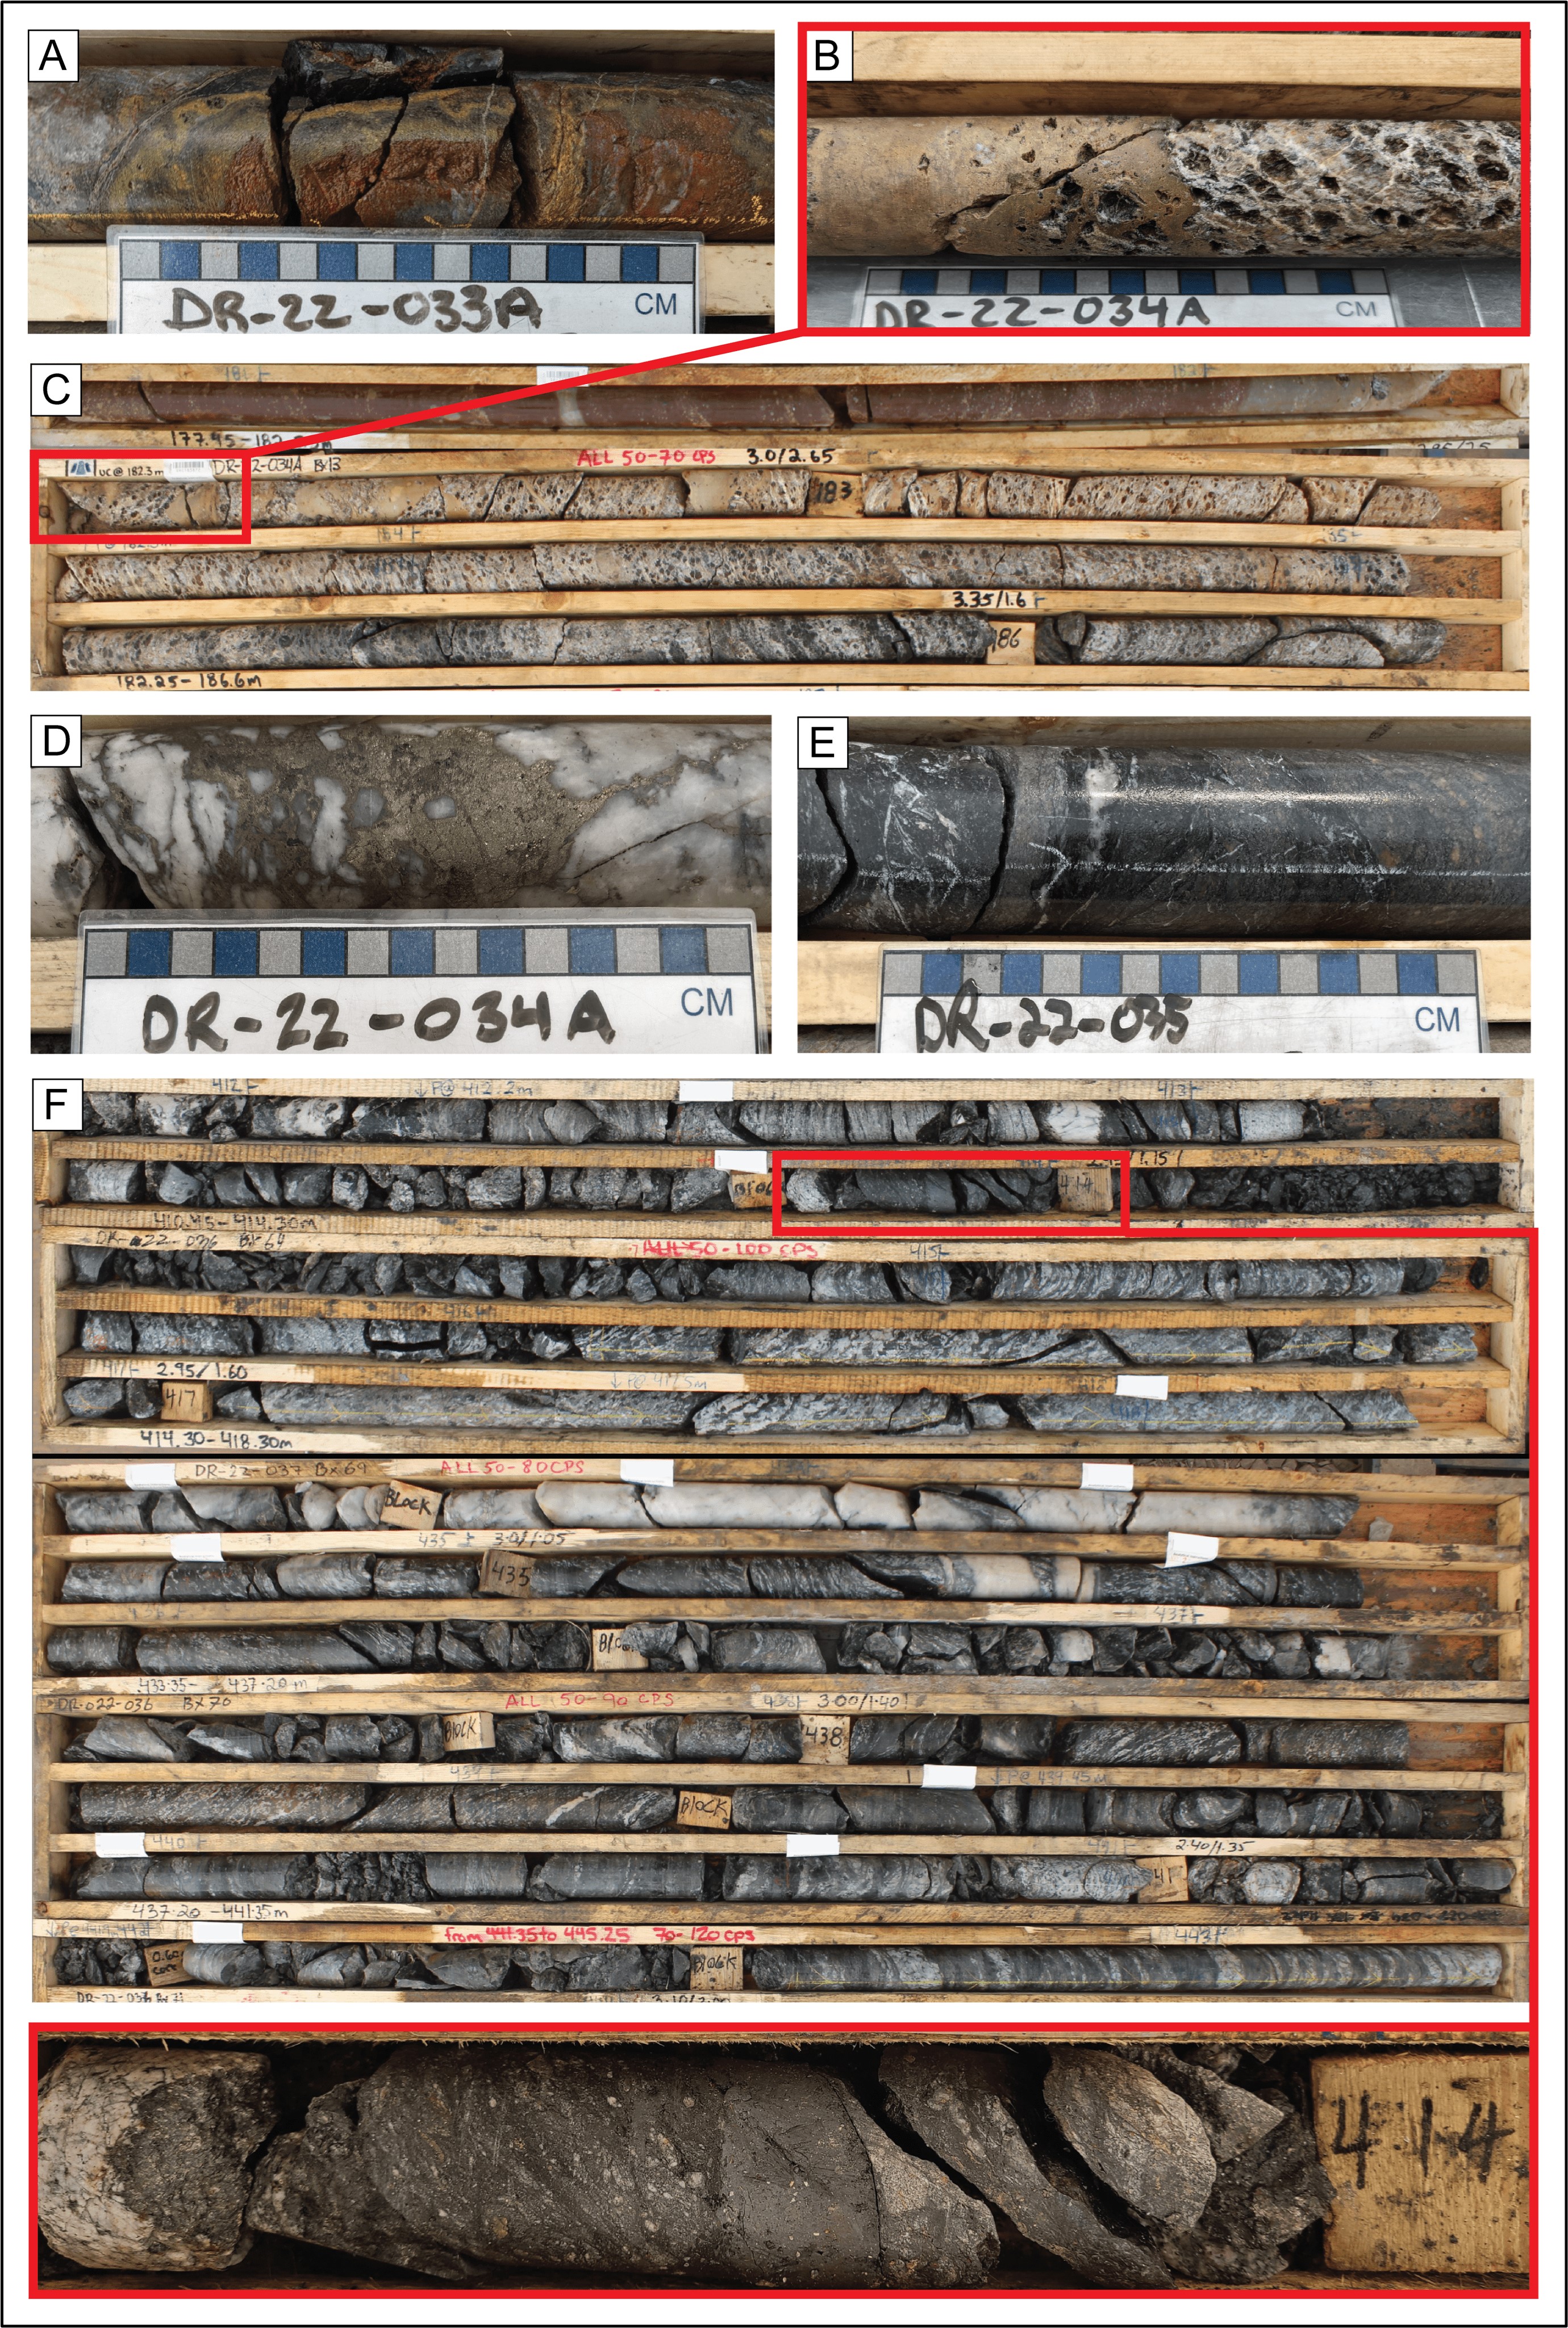 Core photos of structural zones from the Phase III summer drill program. A) Graphiticbreccia hosting a hematite and limonite redox front in DR-22-033A. B&C) DR-22-034A unconformity contact with argillized basement hosting elevated boron. D) Quartz-flooded fault zone with anomalous Mo, Cu, and Co in DR-22-034A. E) Graphitic mylonite zone in DR-22-035 with anomalous Mo and S. F) Lenses of graphitic faulting in DR-22-036 with massive quartz veining hosting elevated boron and uranium.